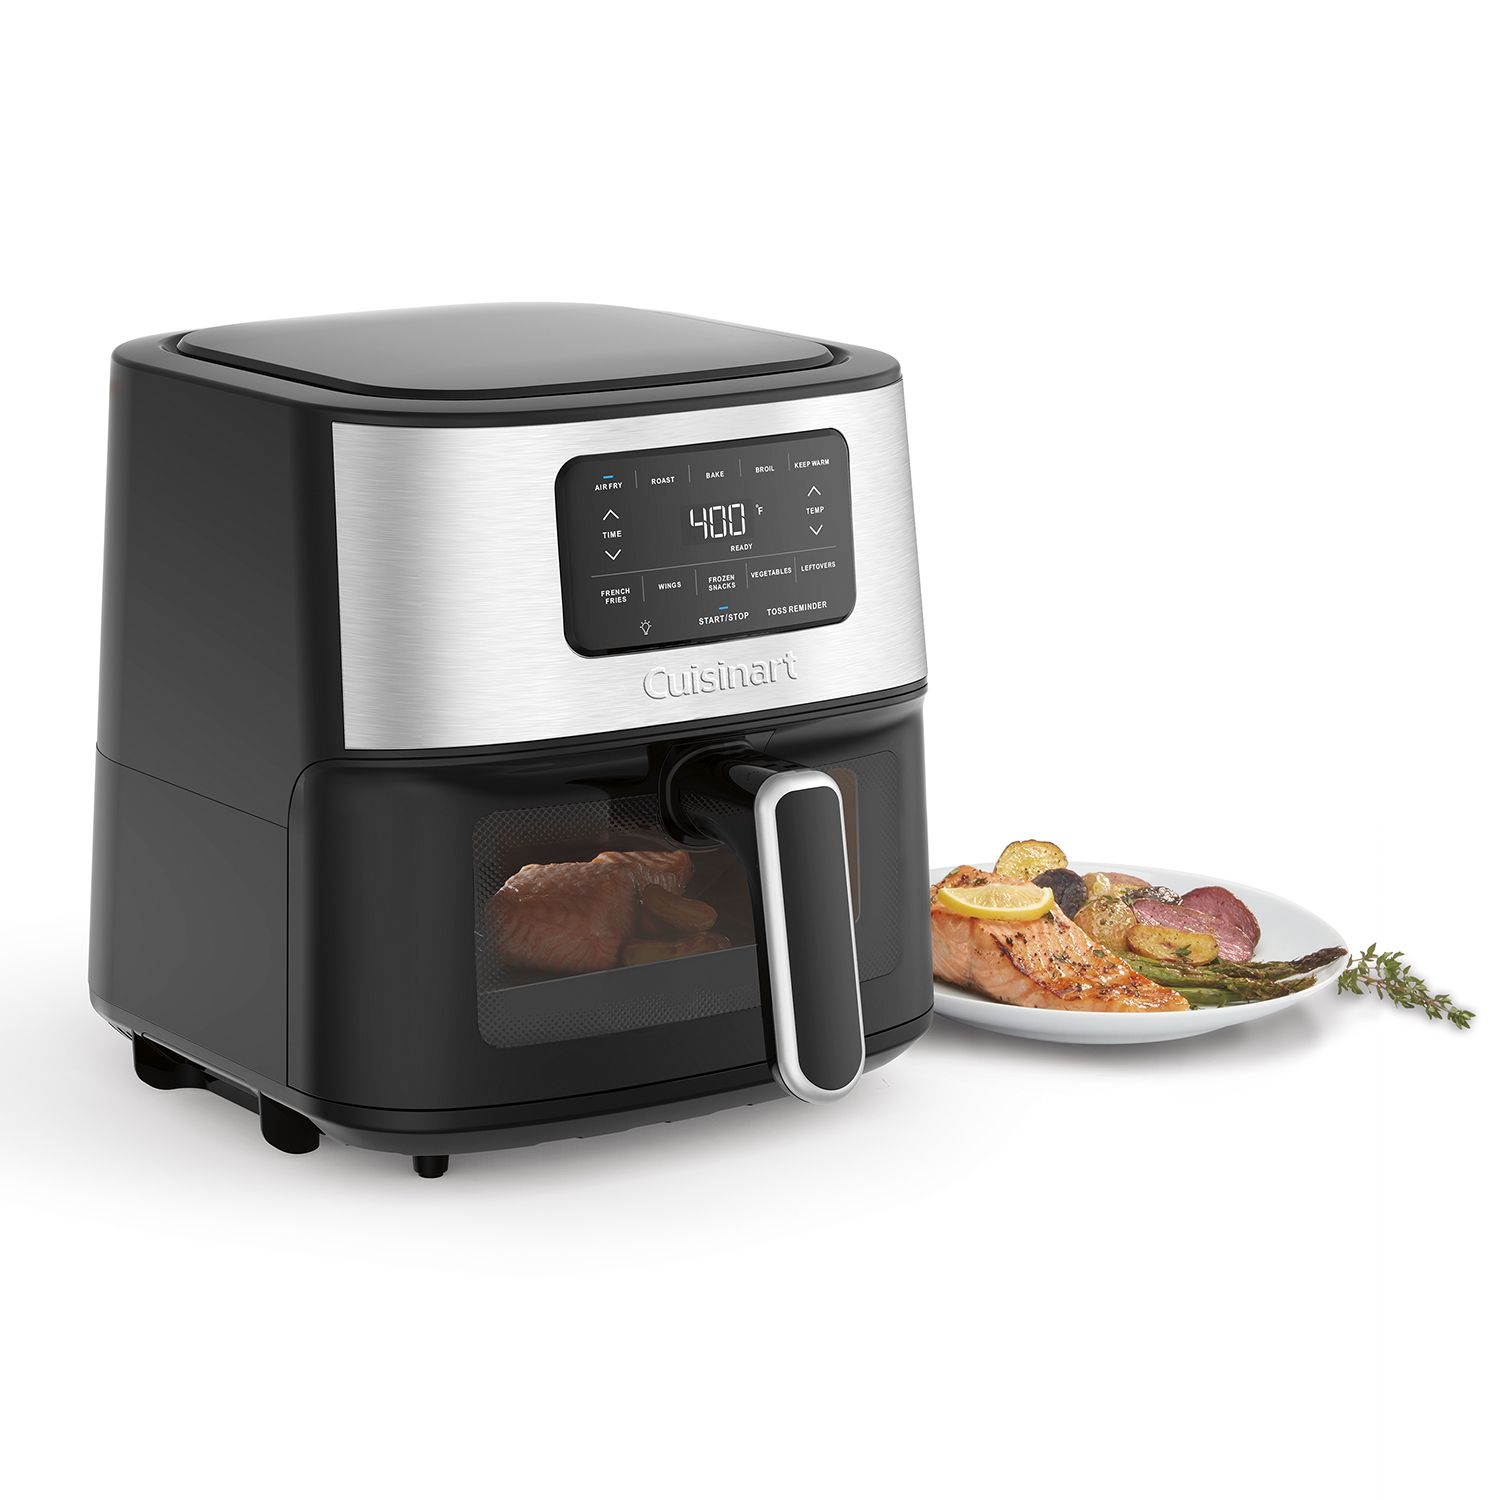 West Bend 10-Qt. Double Up Air Fryer with 15 Presets & Easy-View Windows, Black